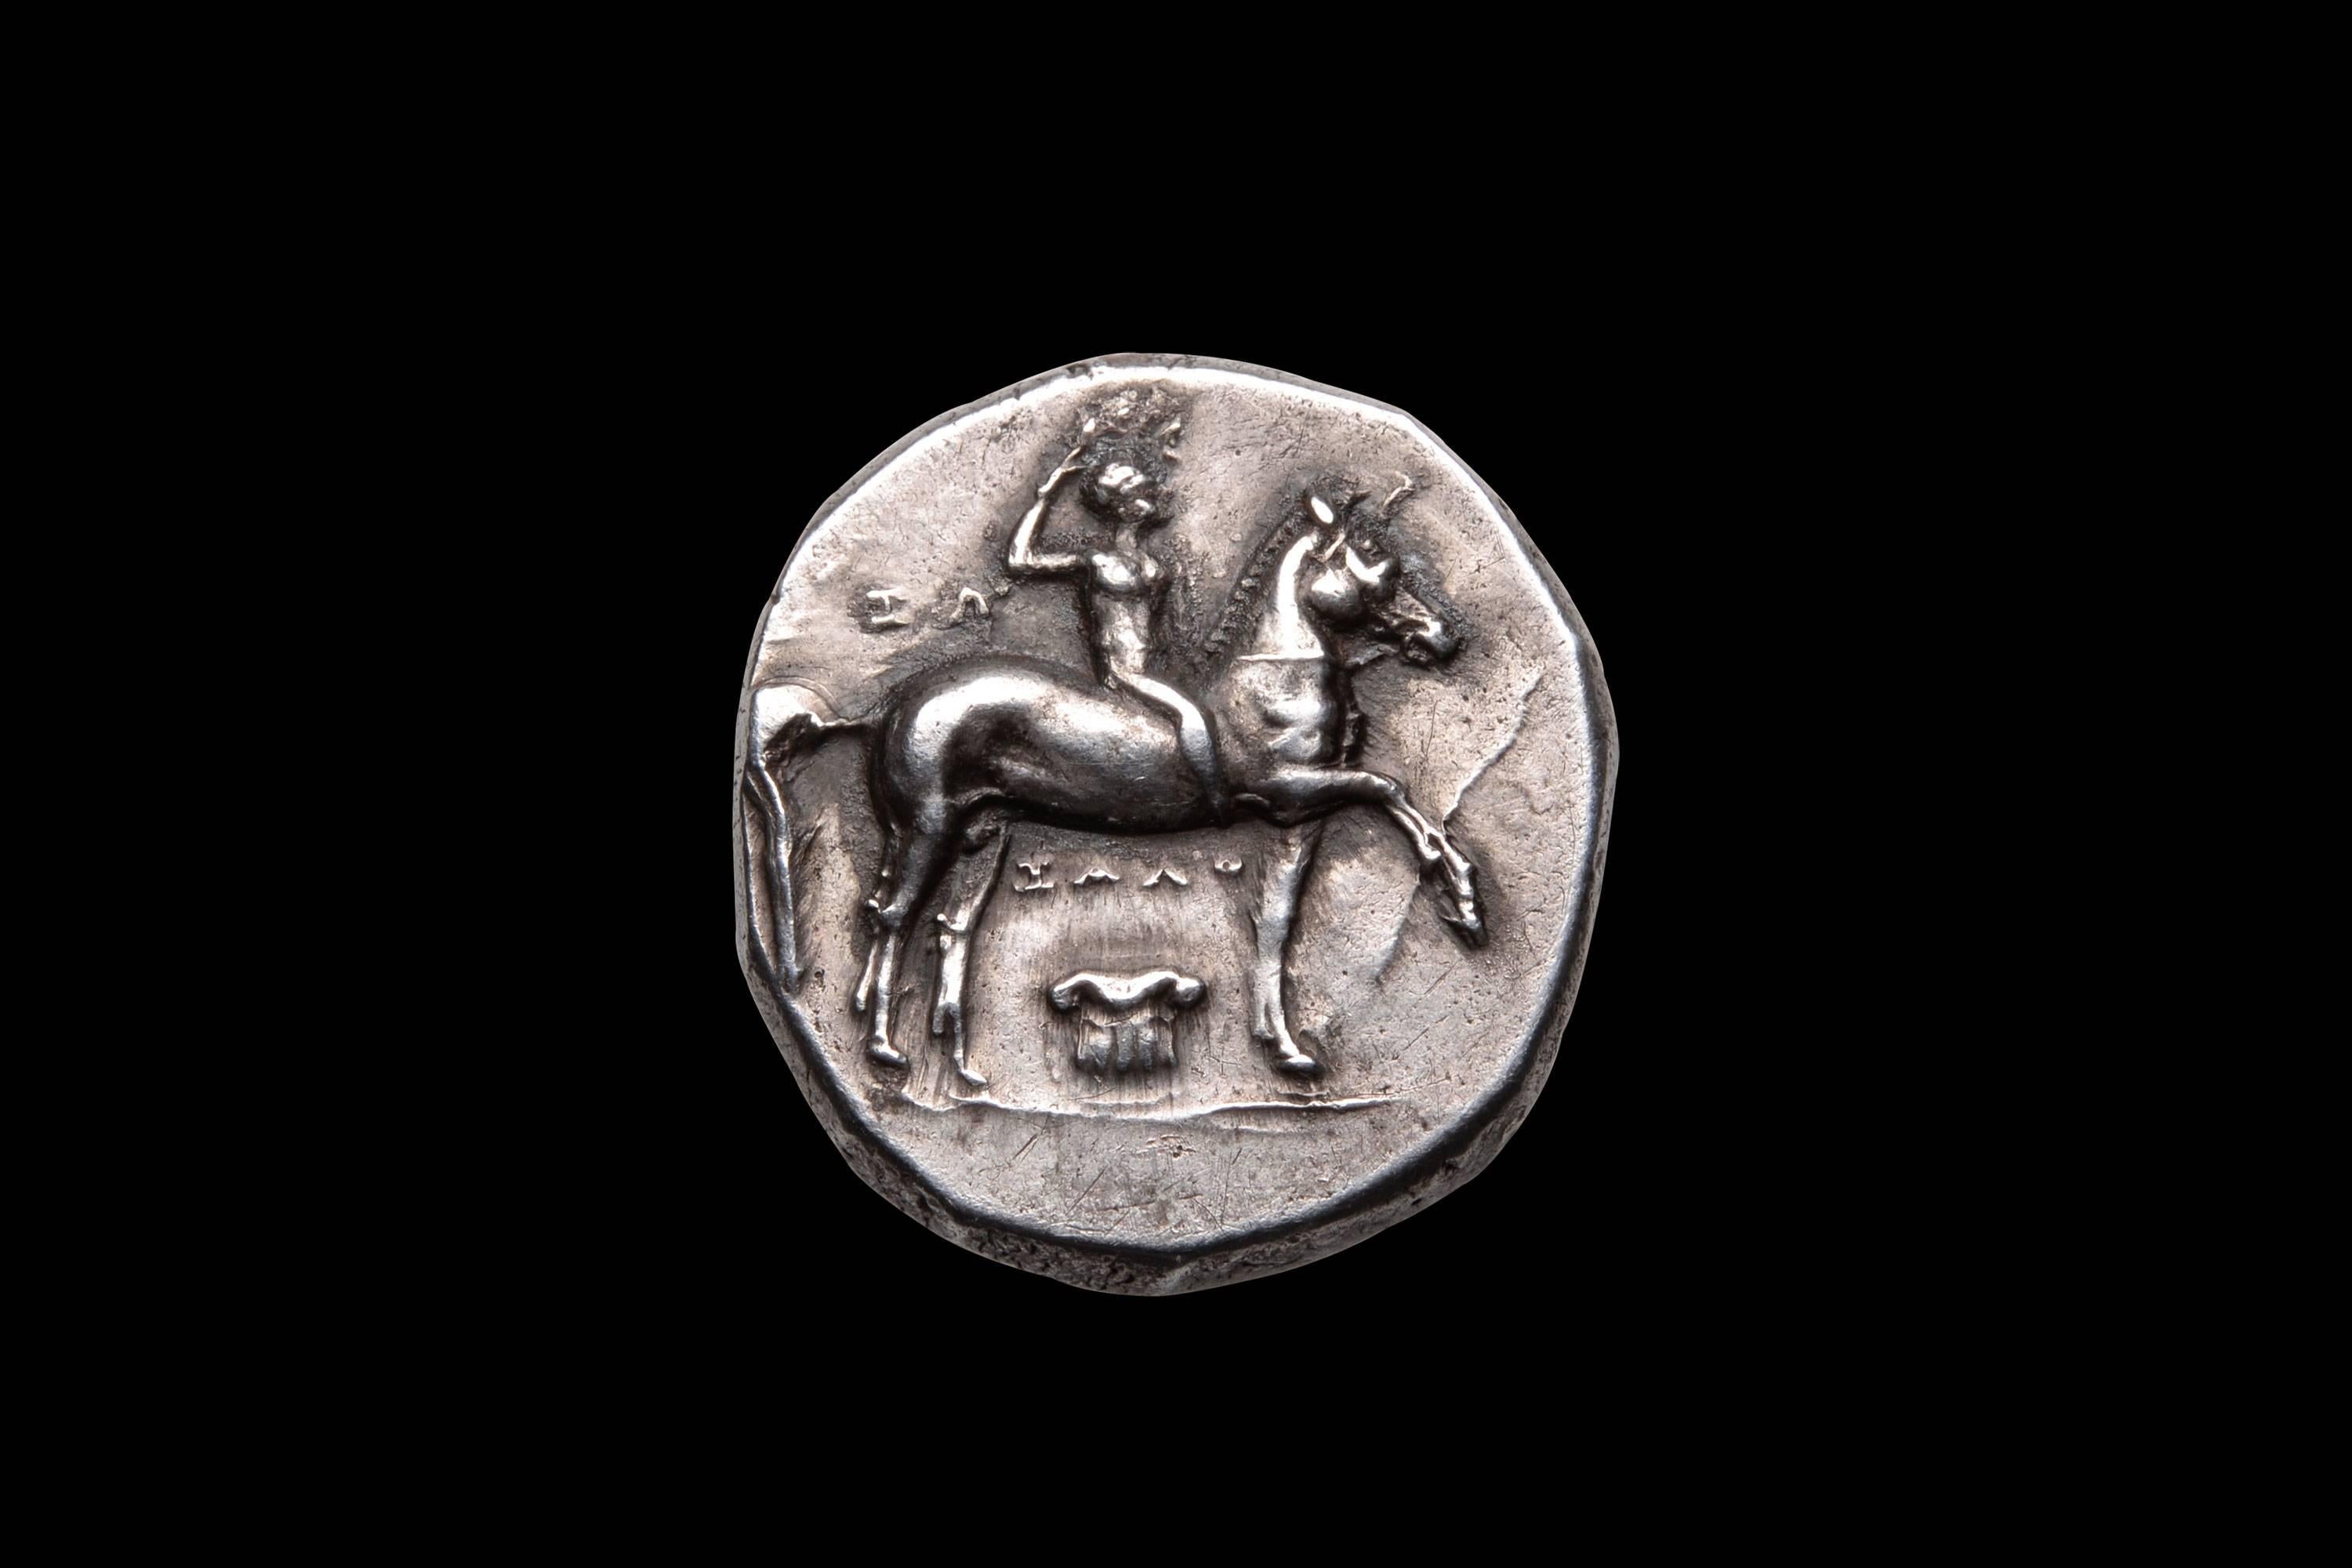 A very beautiful example of one of the most charming ancient Greek coin types. A silver didrachm from the city of Taras, Southern Italy. Struck circa 280 - 272 BC.

The obverse with a naked youth on horseback, shown crowning himself with a laurel